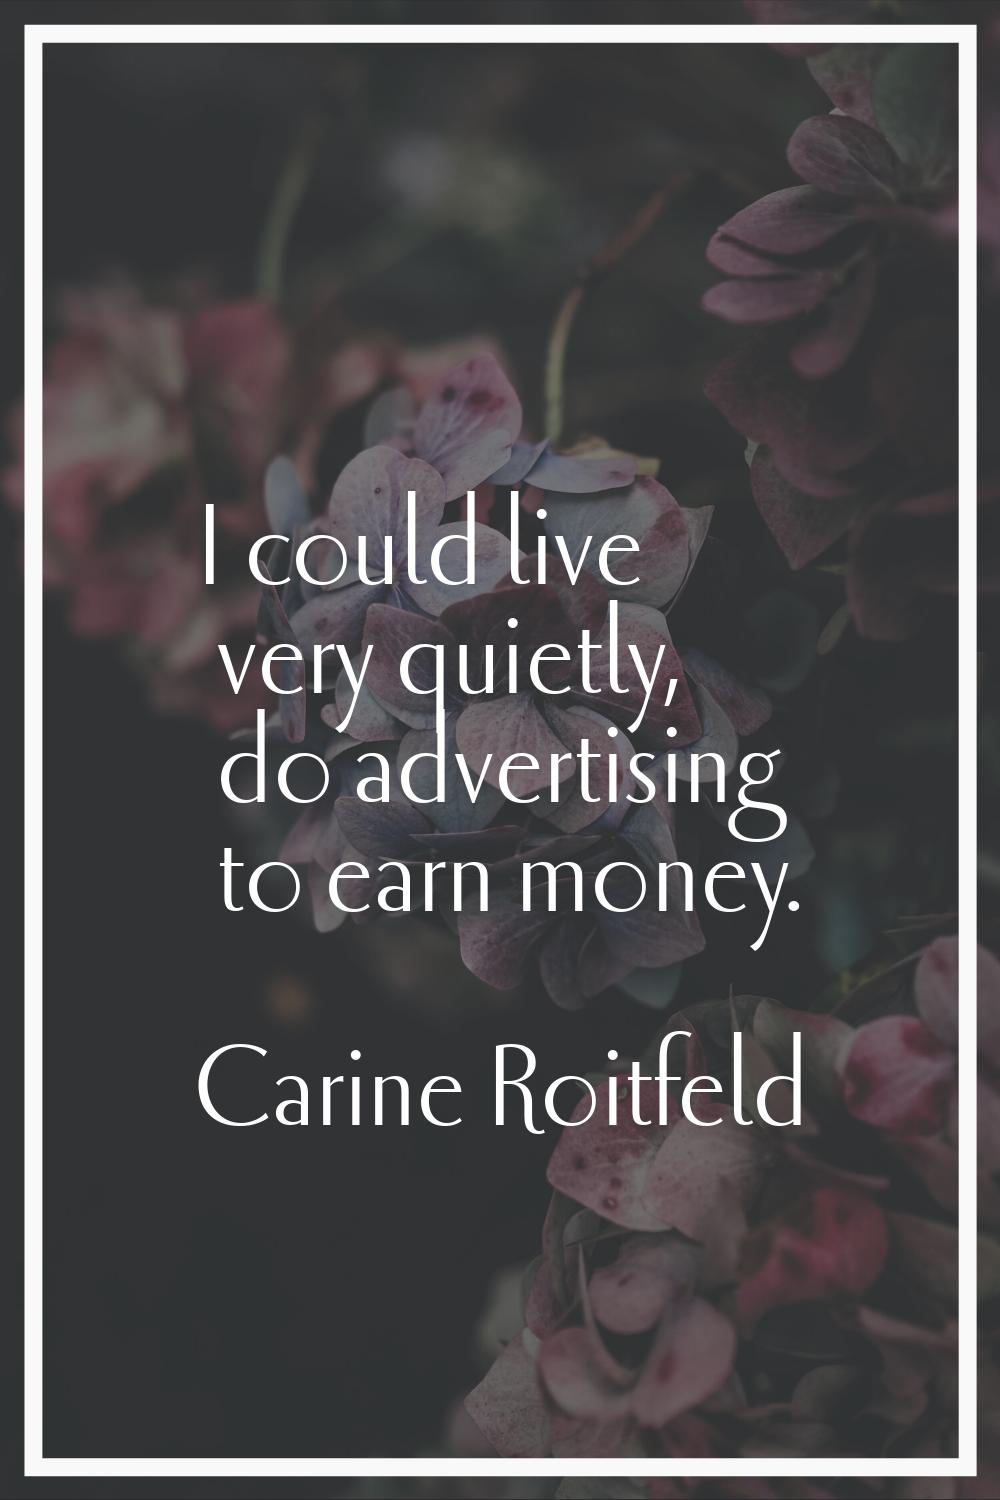 I could live very quietly, do advertising to earn money.